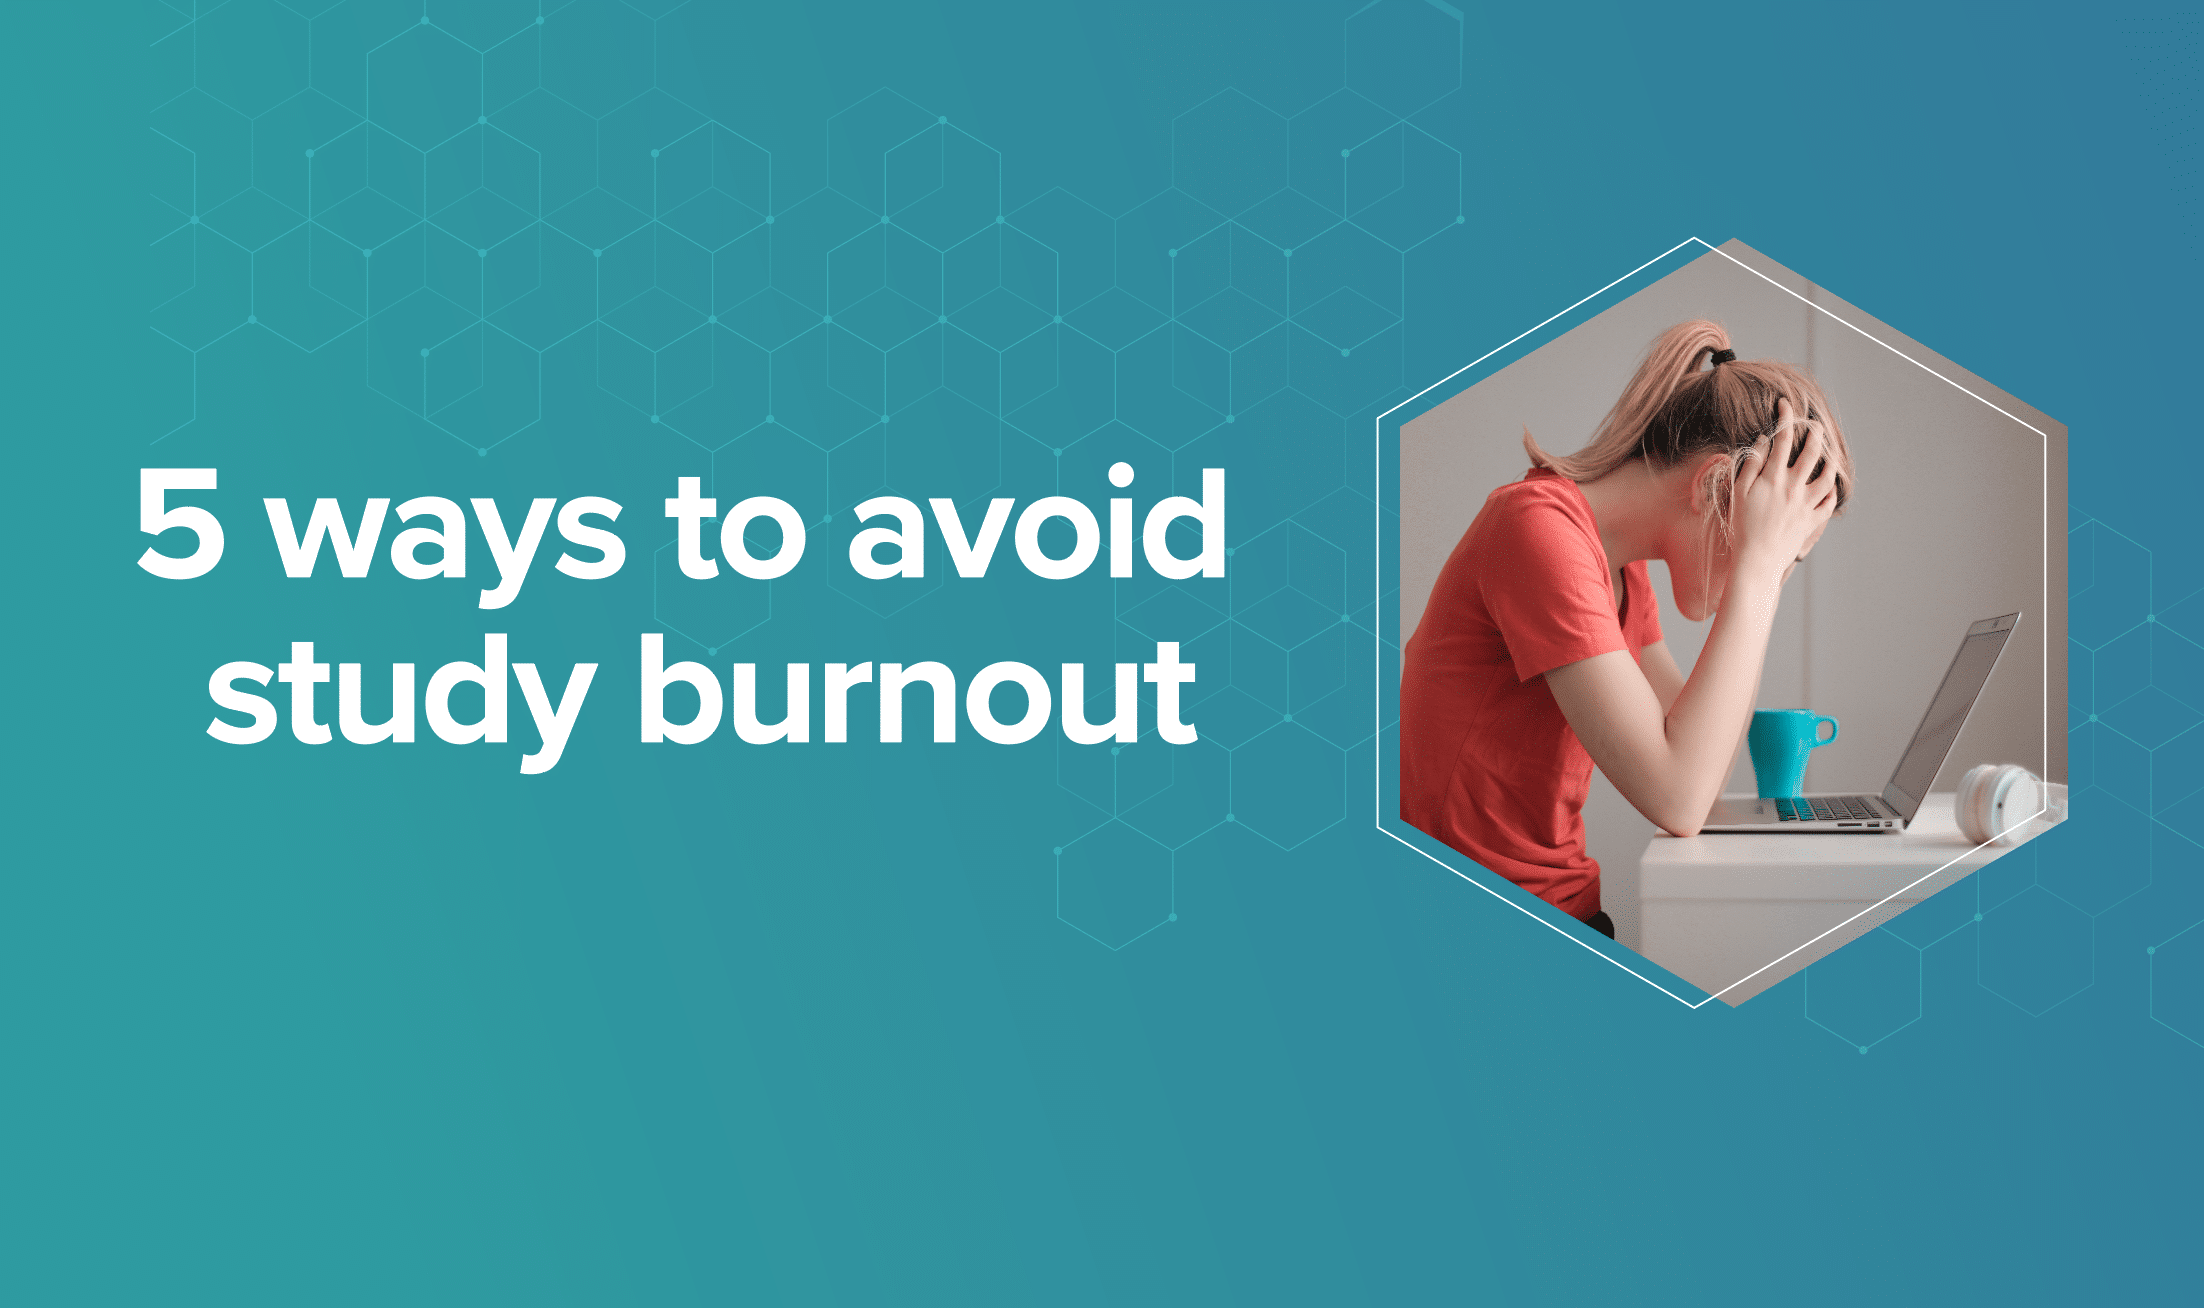 5 tips to avoid study burnout 